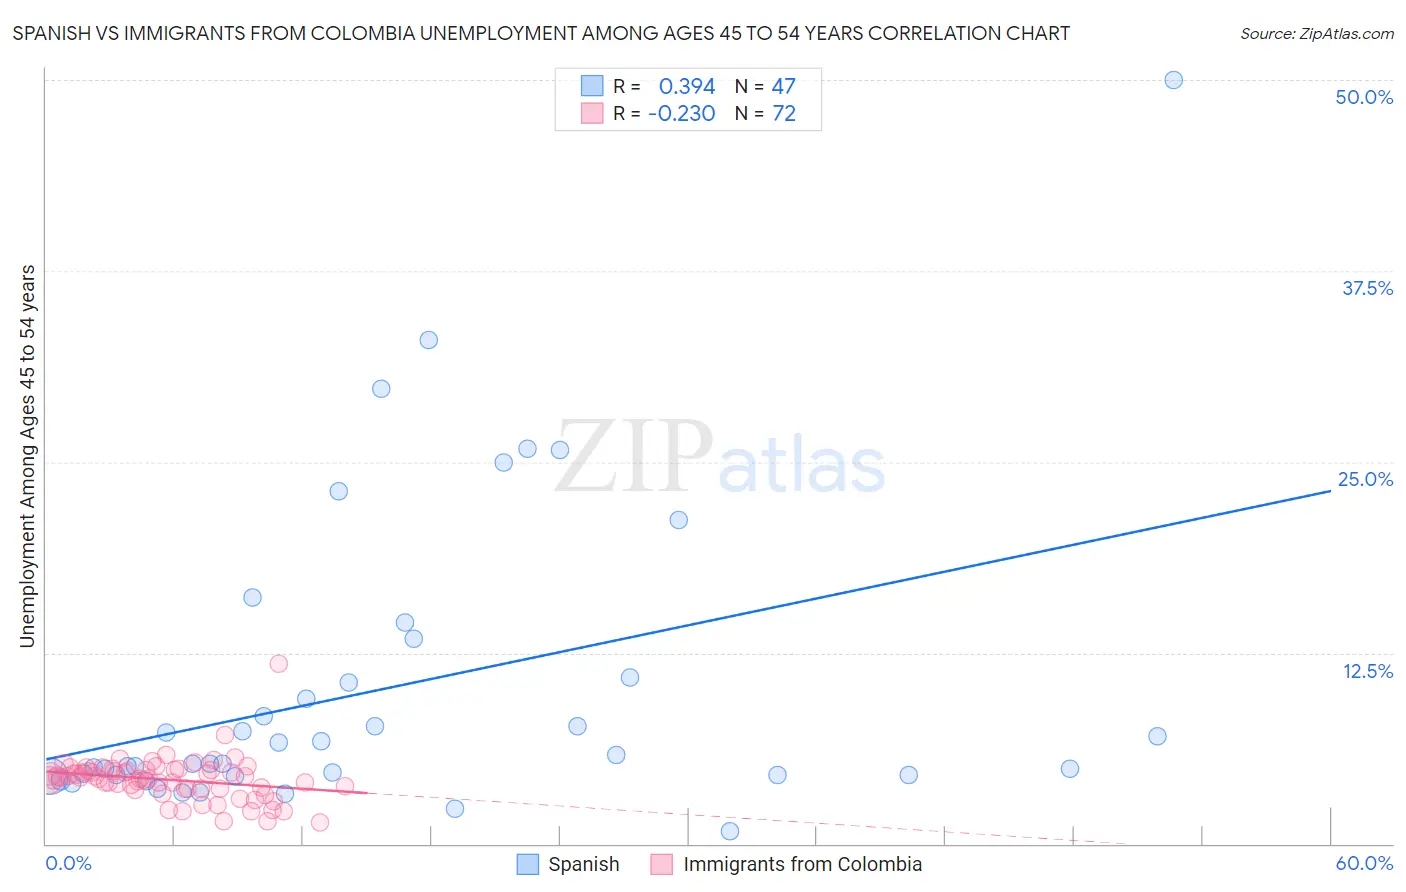 Spanish vs Immigrants from Colombia Unemployment Among Ages 45 to 54 years